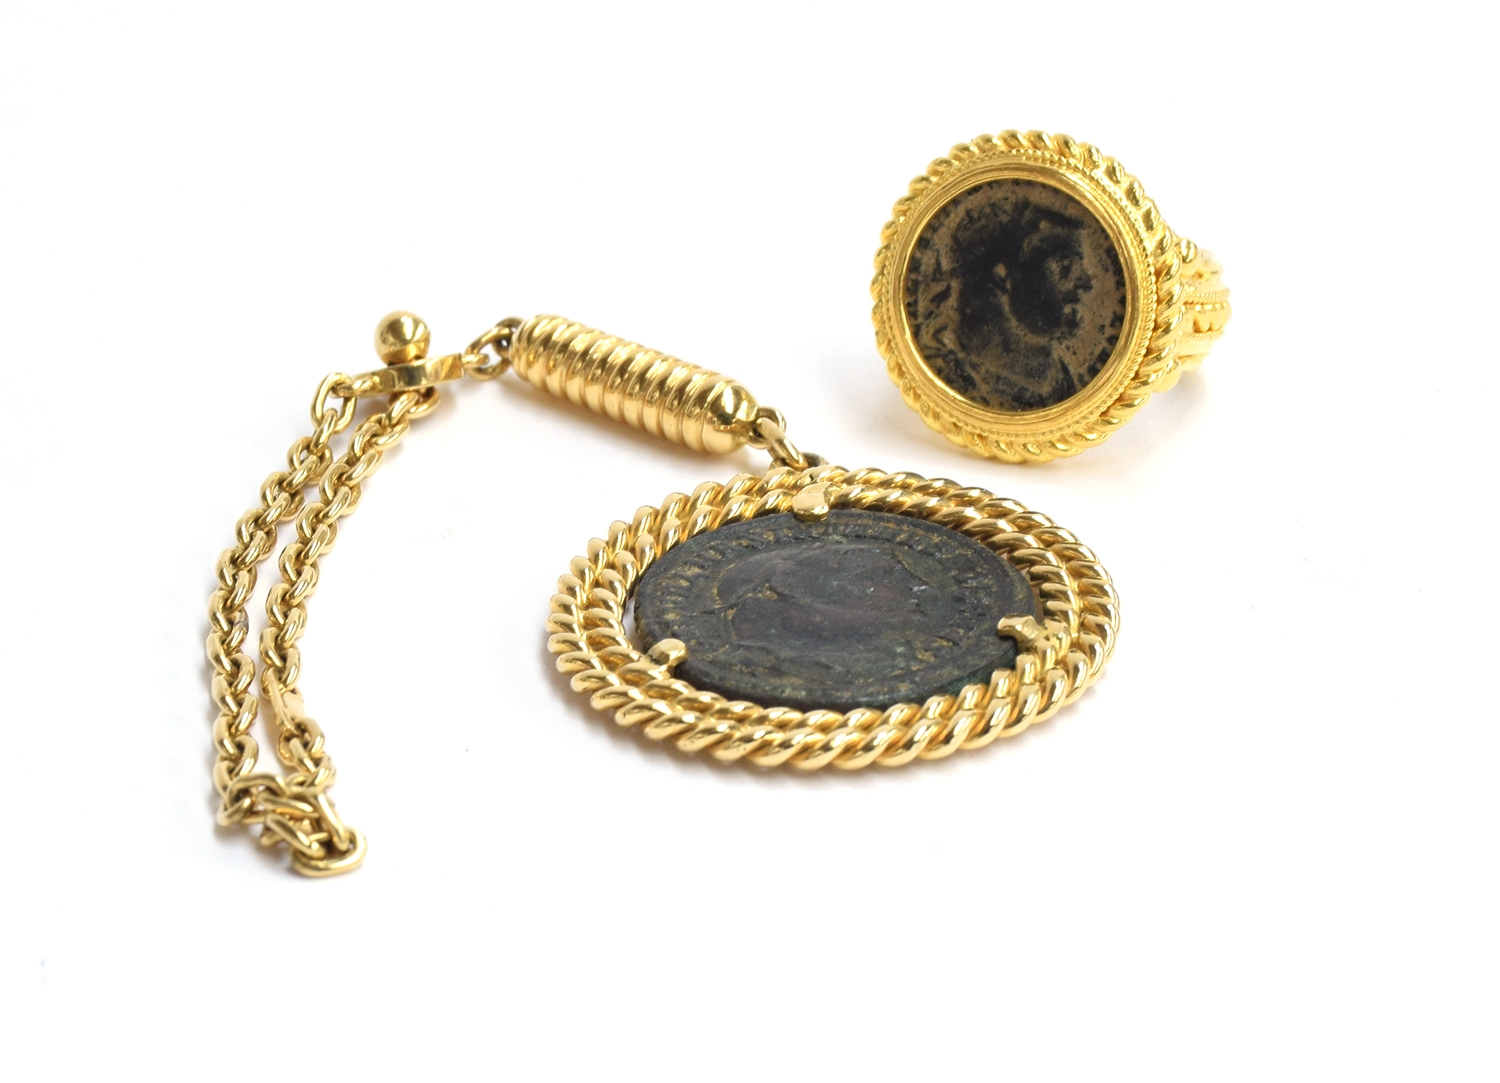 Roman coin jewellery, a Constantine bronze coin mounted as a gold medal (tests as 18ct), chain